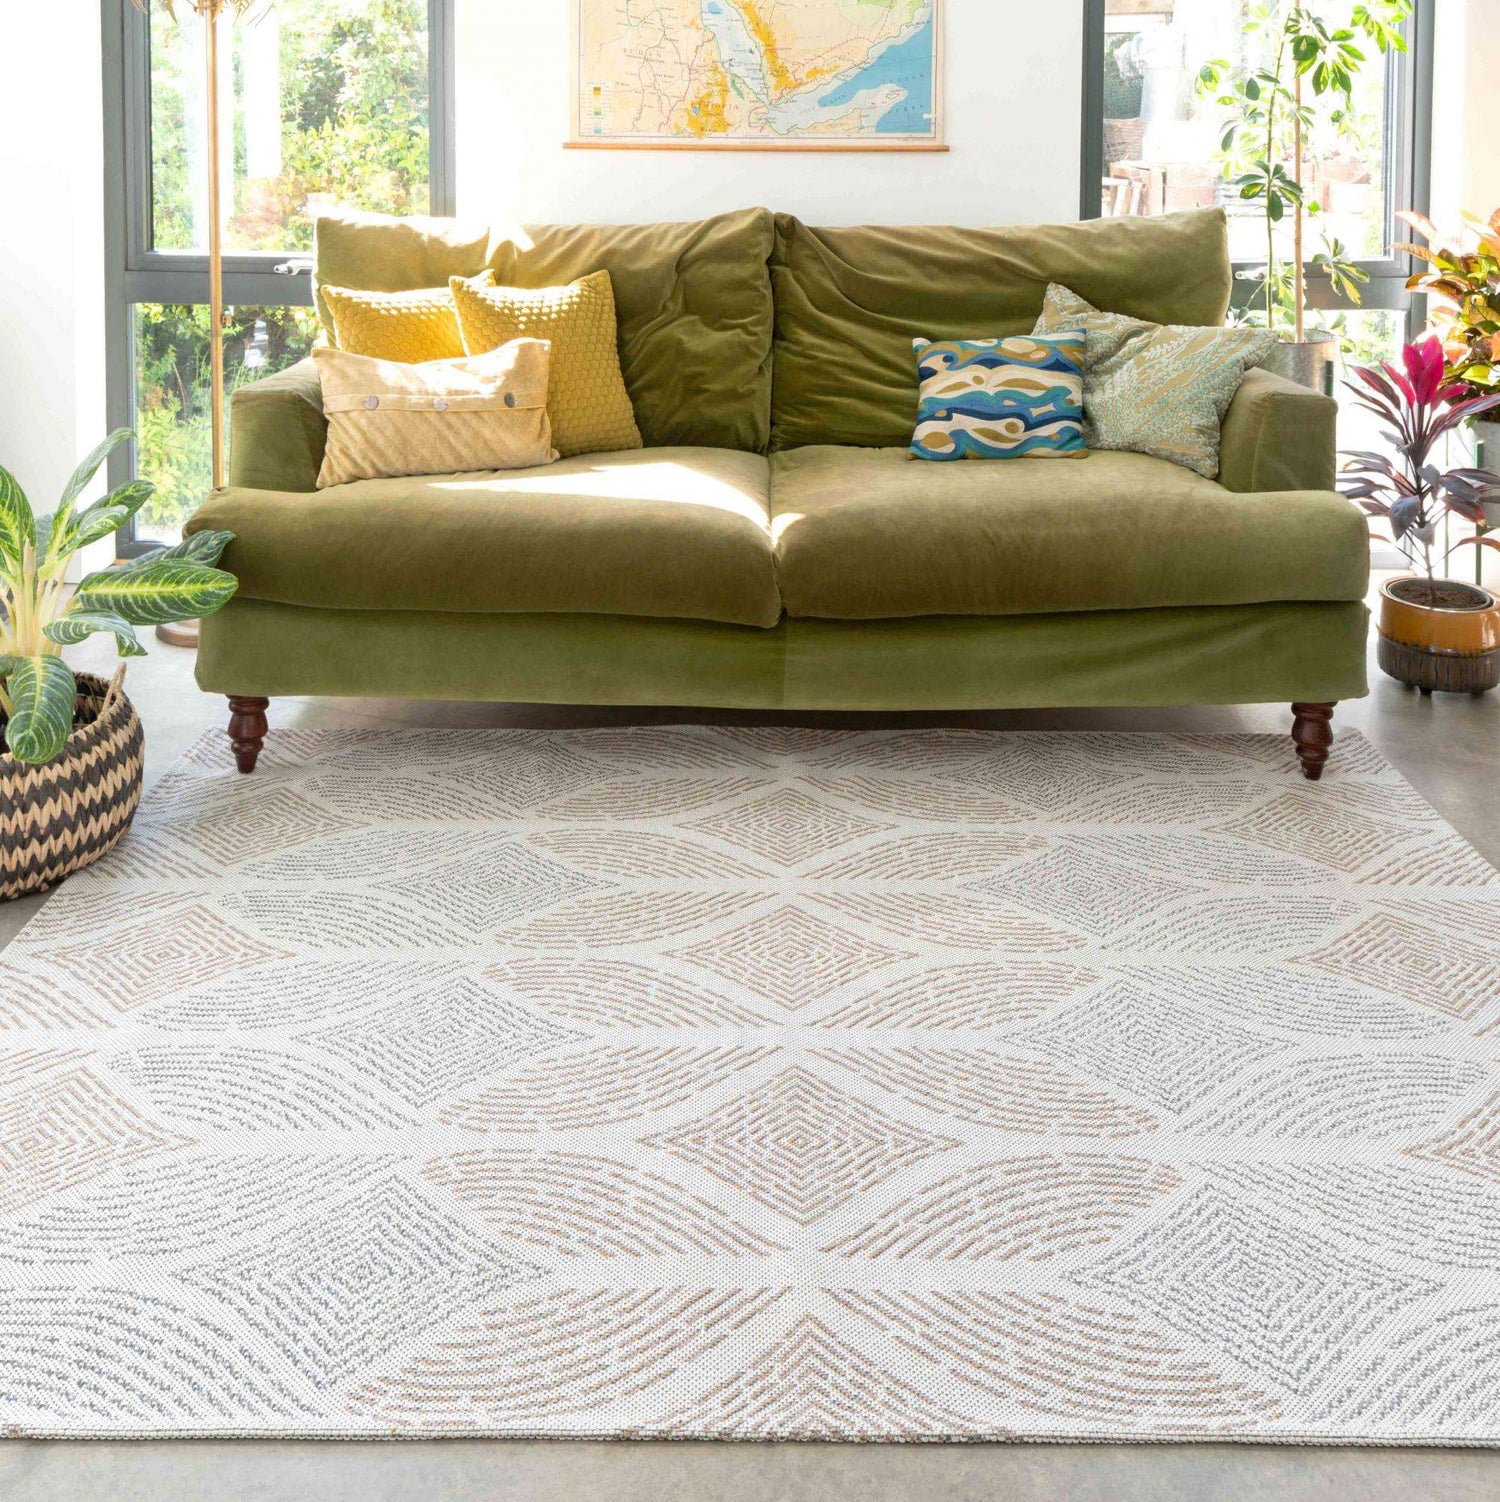 Moroccan Tile Faded Beige Woven Sustainable Cotton Runner Rug